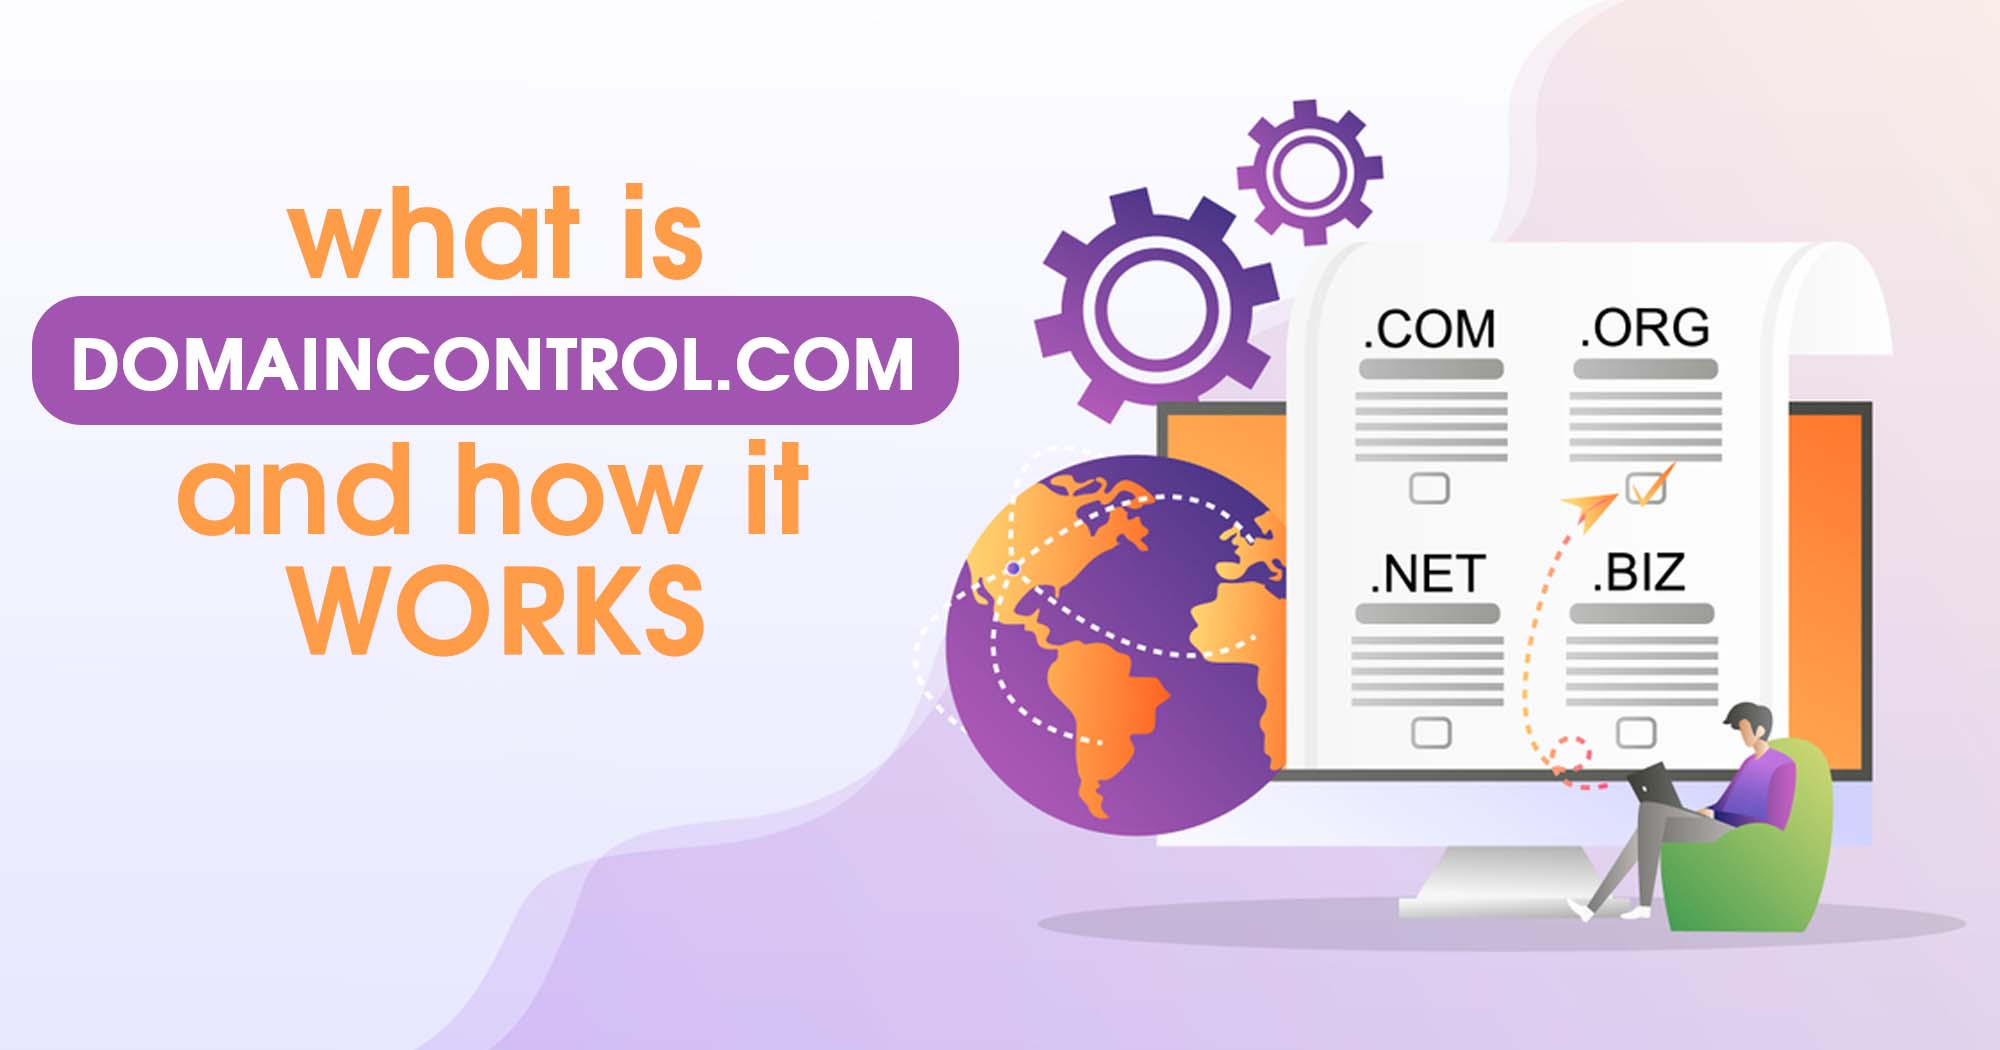 What is DomainControl.com